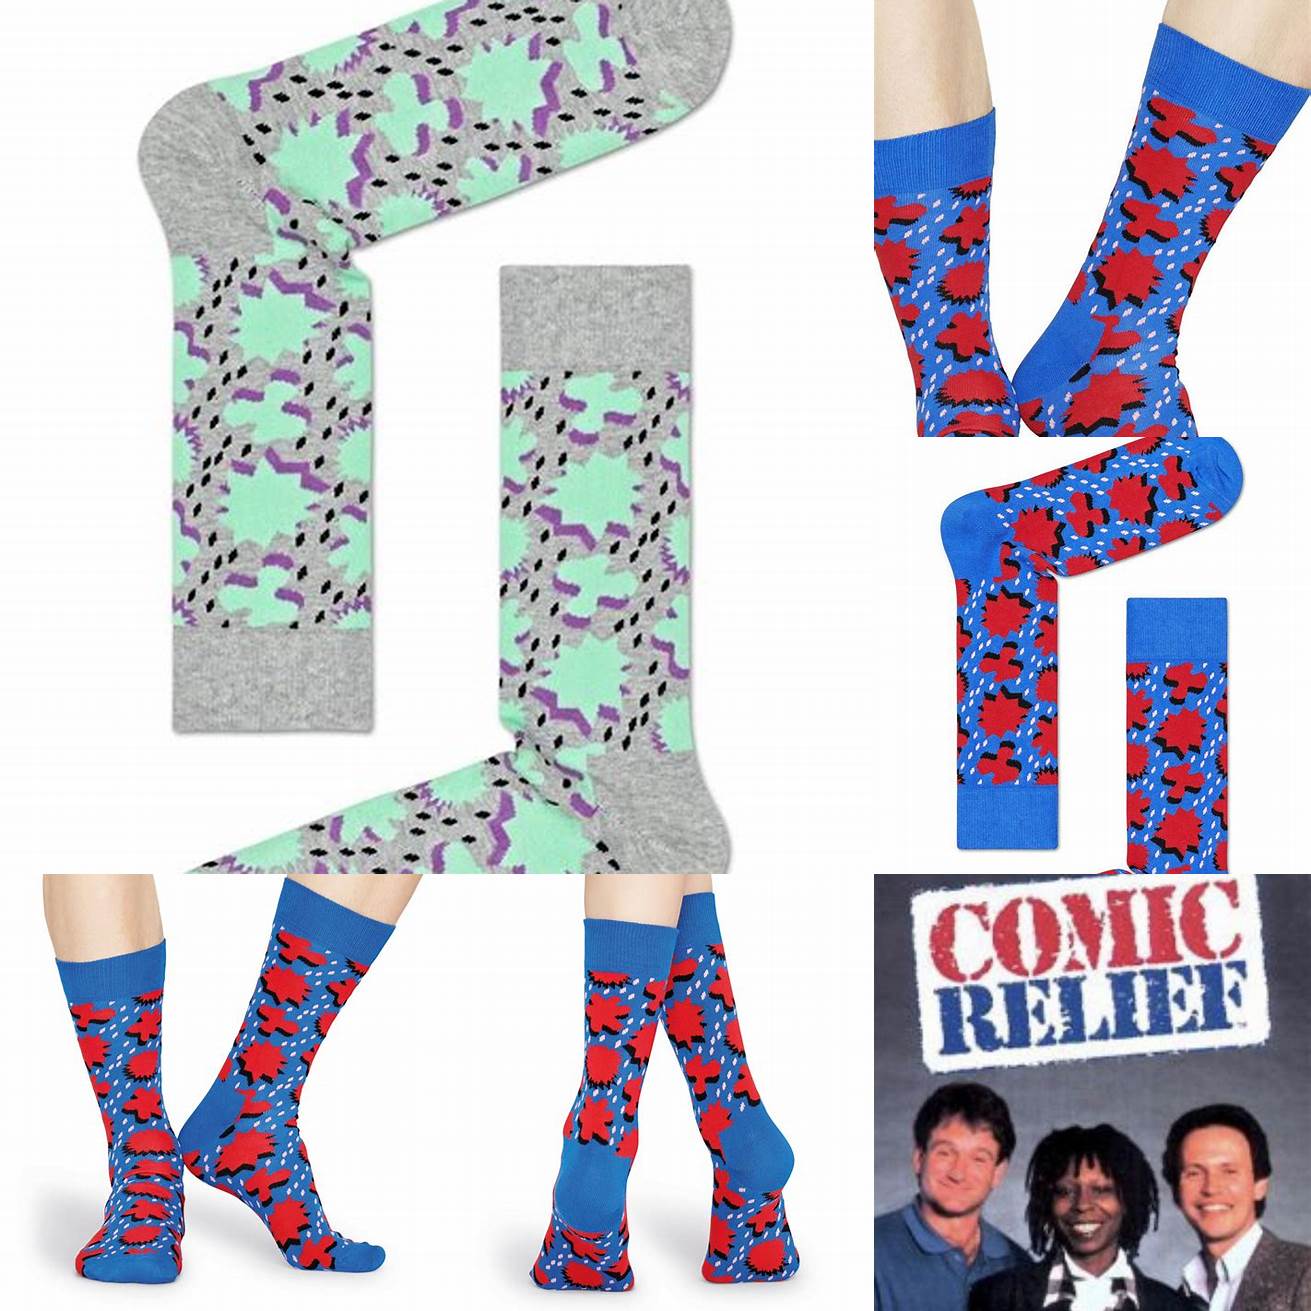 5 Socks as the Comic Relief